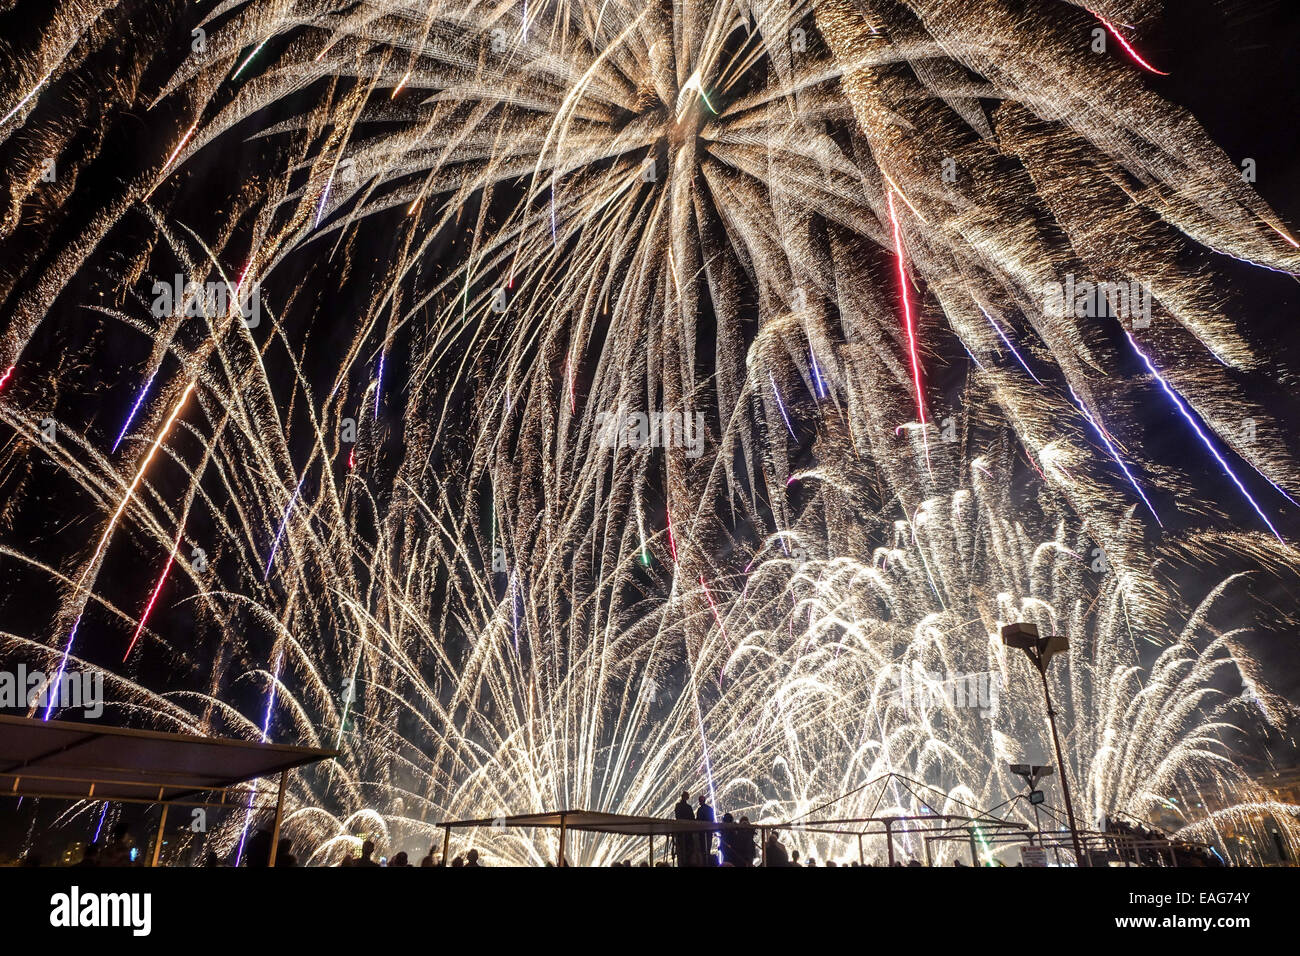 Fireworks fill the frame at this massive beach display in Benidorm Spain, with people silhouetted. Stock Photo